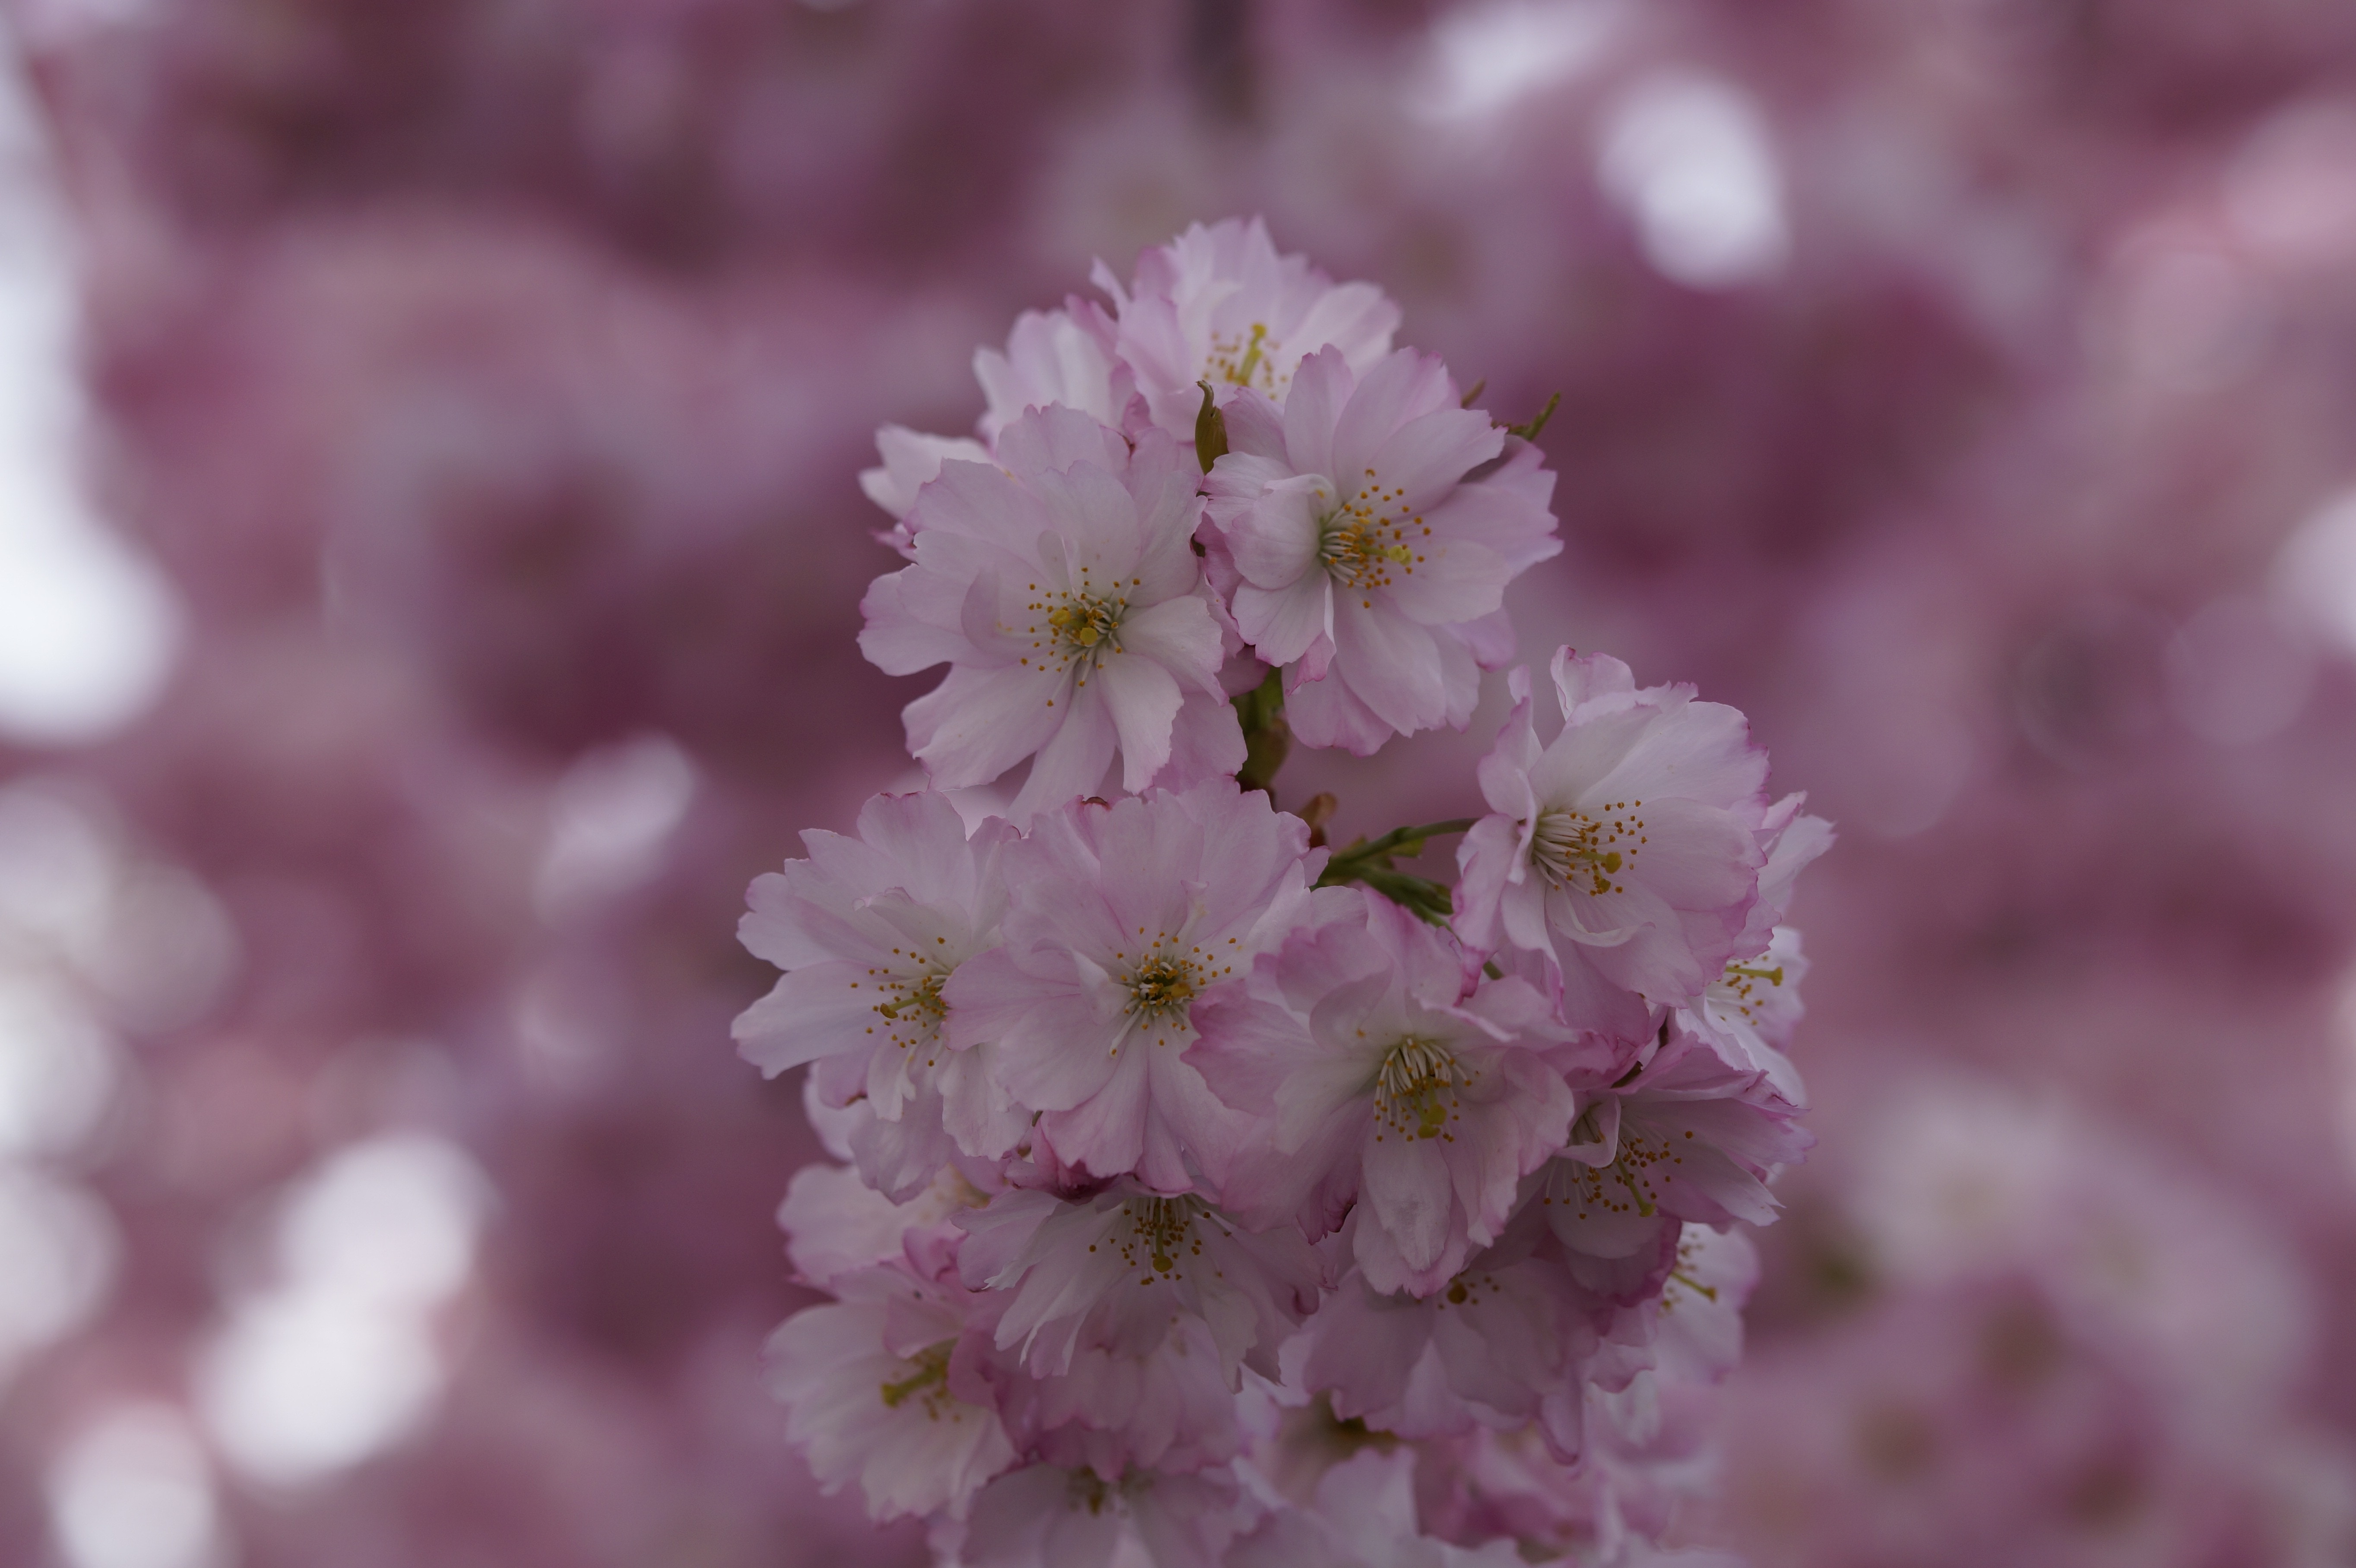 shallow focus photography of white-and-pink petal flowers